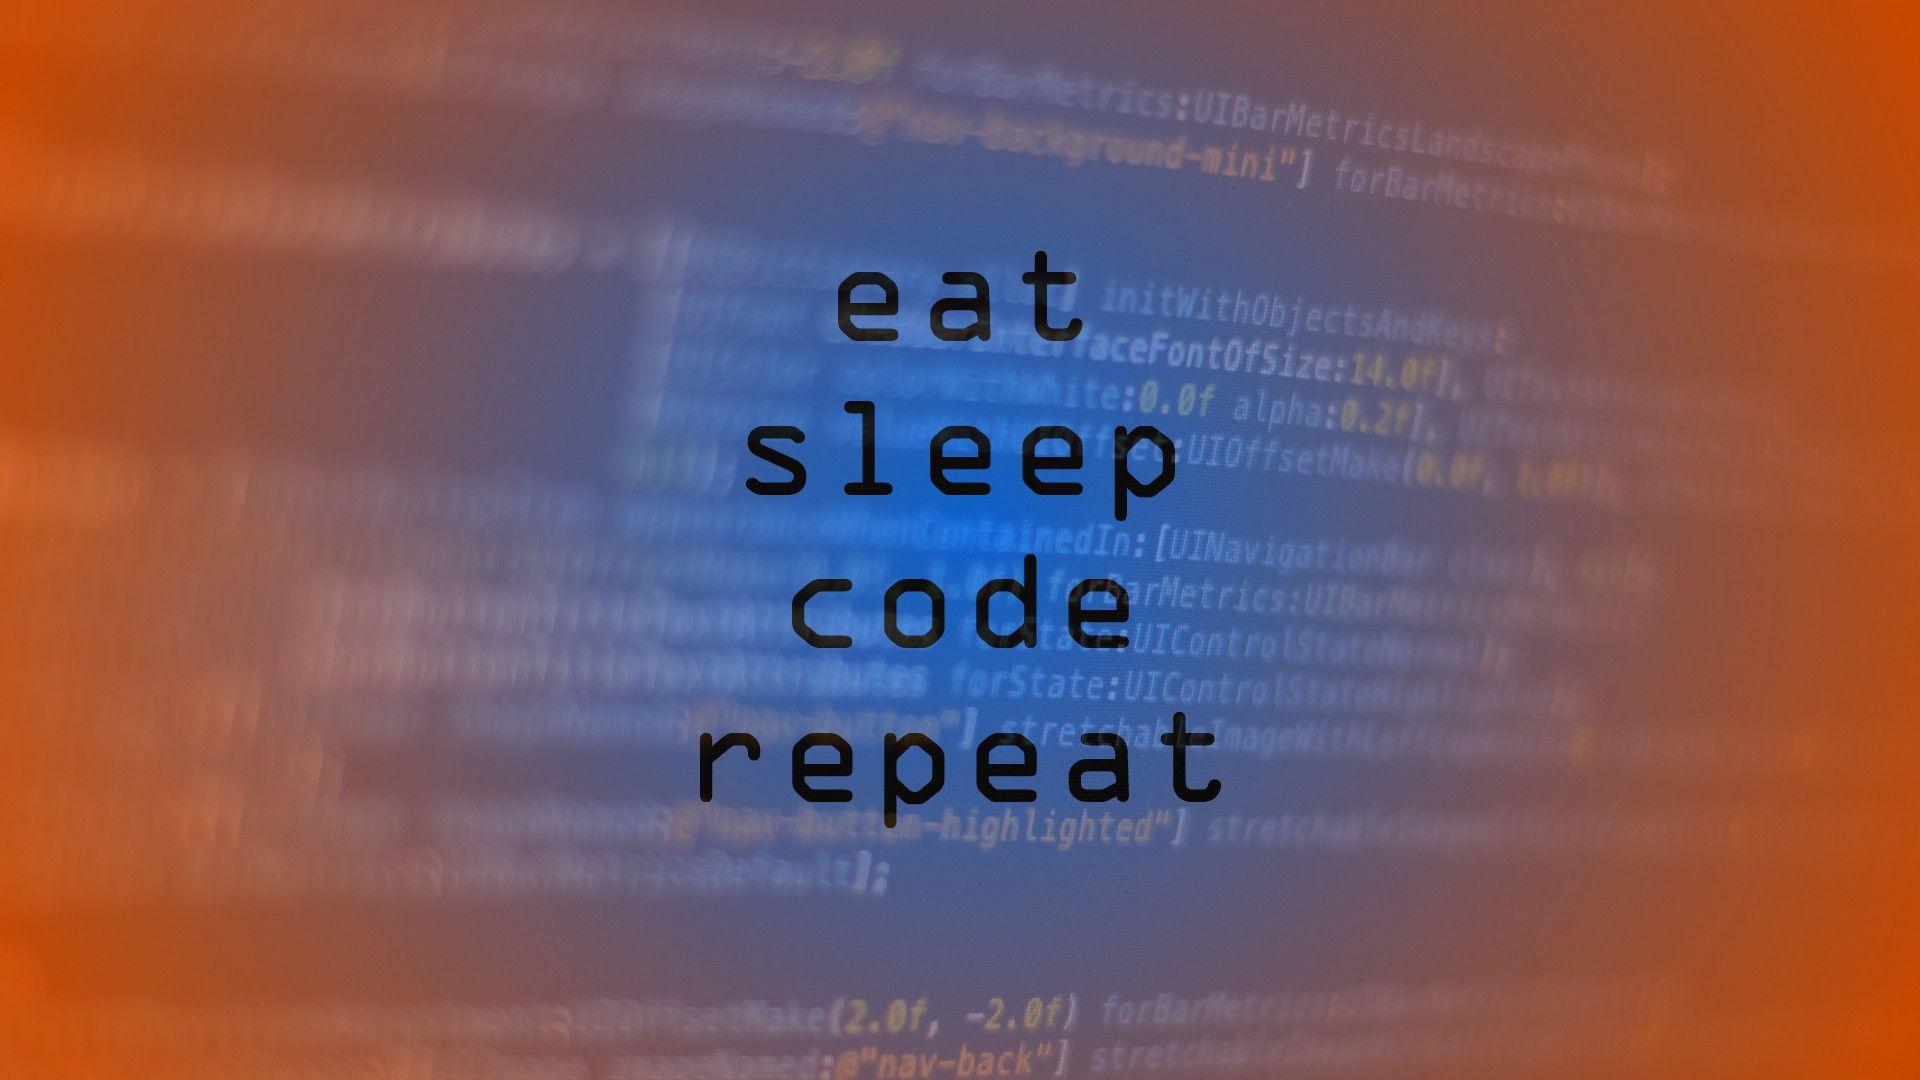 Couldn't find a good coding wallpaper, so I made my own! 1920x1080